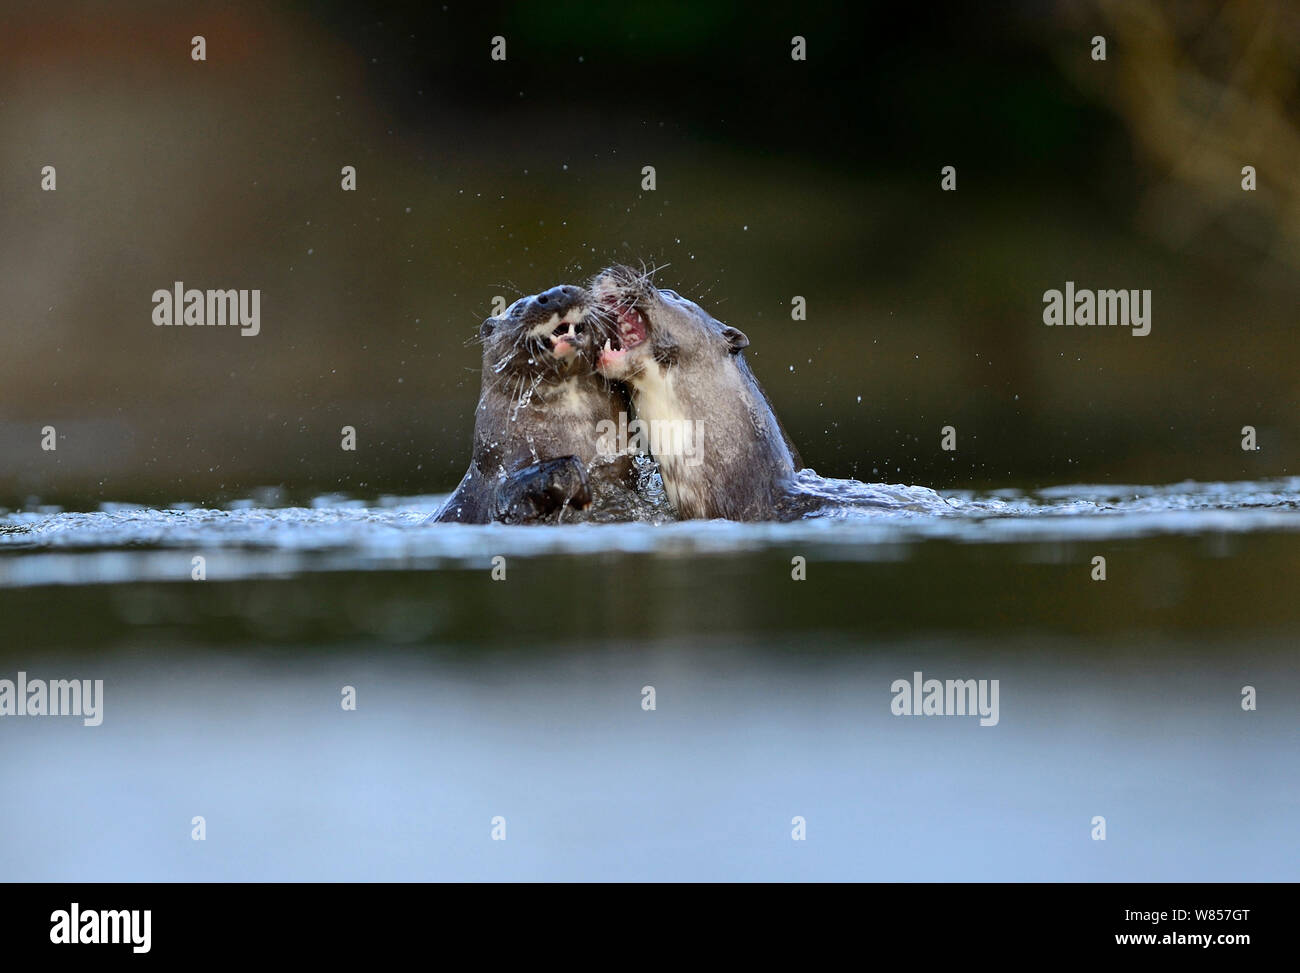 European Otter (Lutra lutra) young adults around 1 year old play fighting in water. River Thet, Thetford, Norfolk, UK, March. Stock Photo